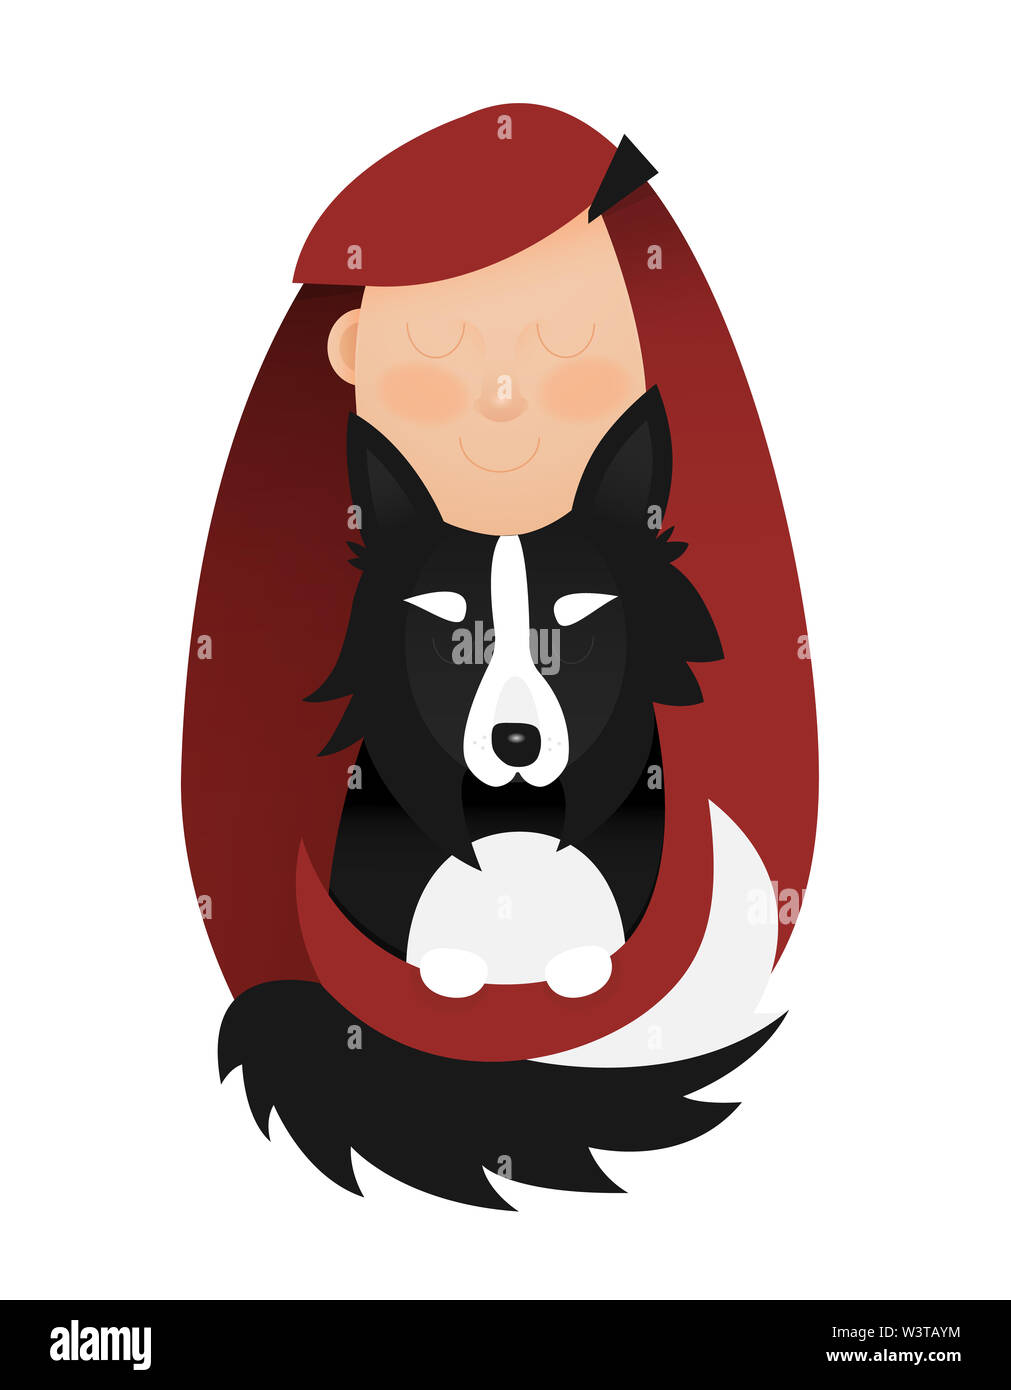 Illustration of young girl hugging, petting, holding the dog. Redheaded Girl with Black and White Border Collie. Stock Photo